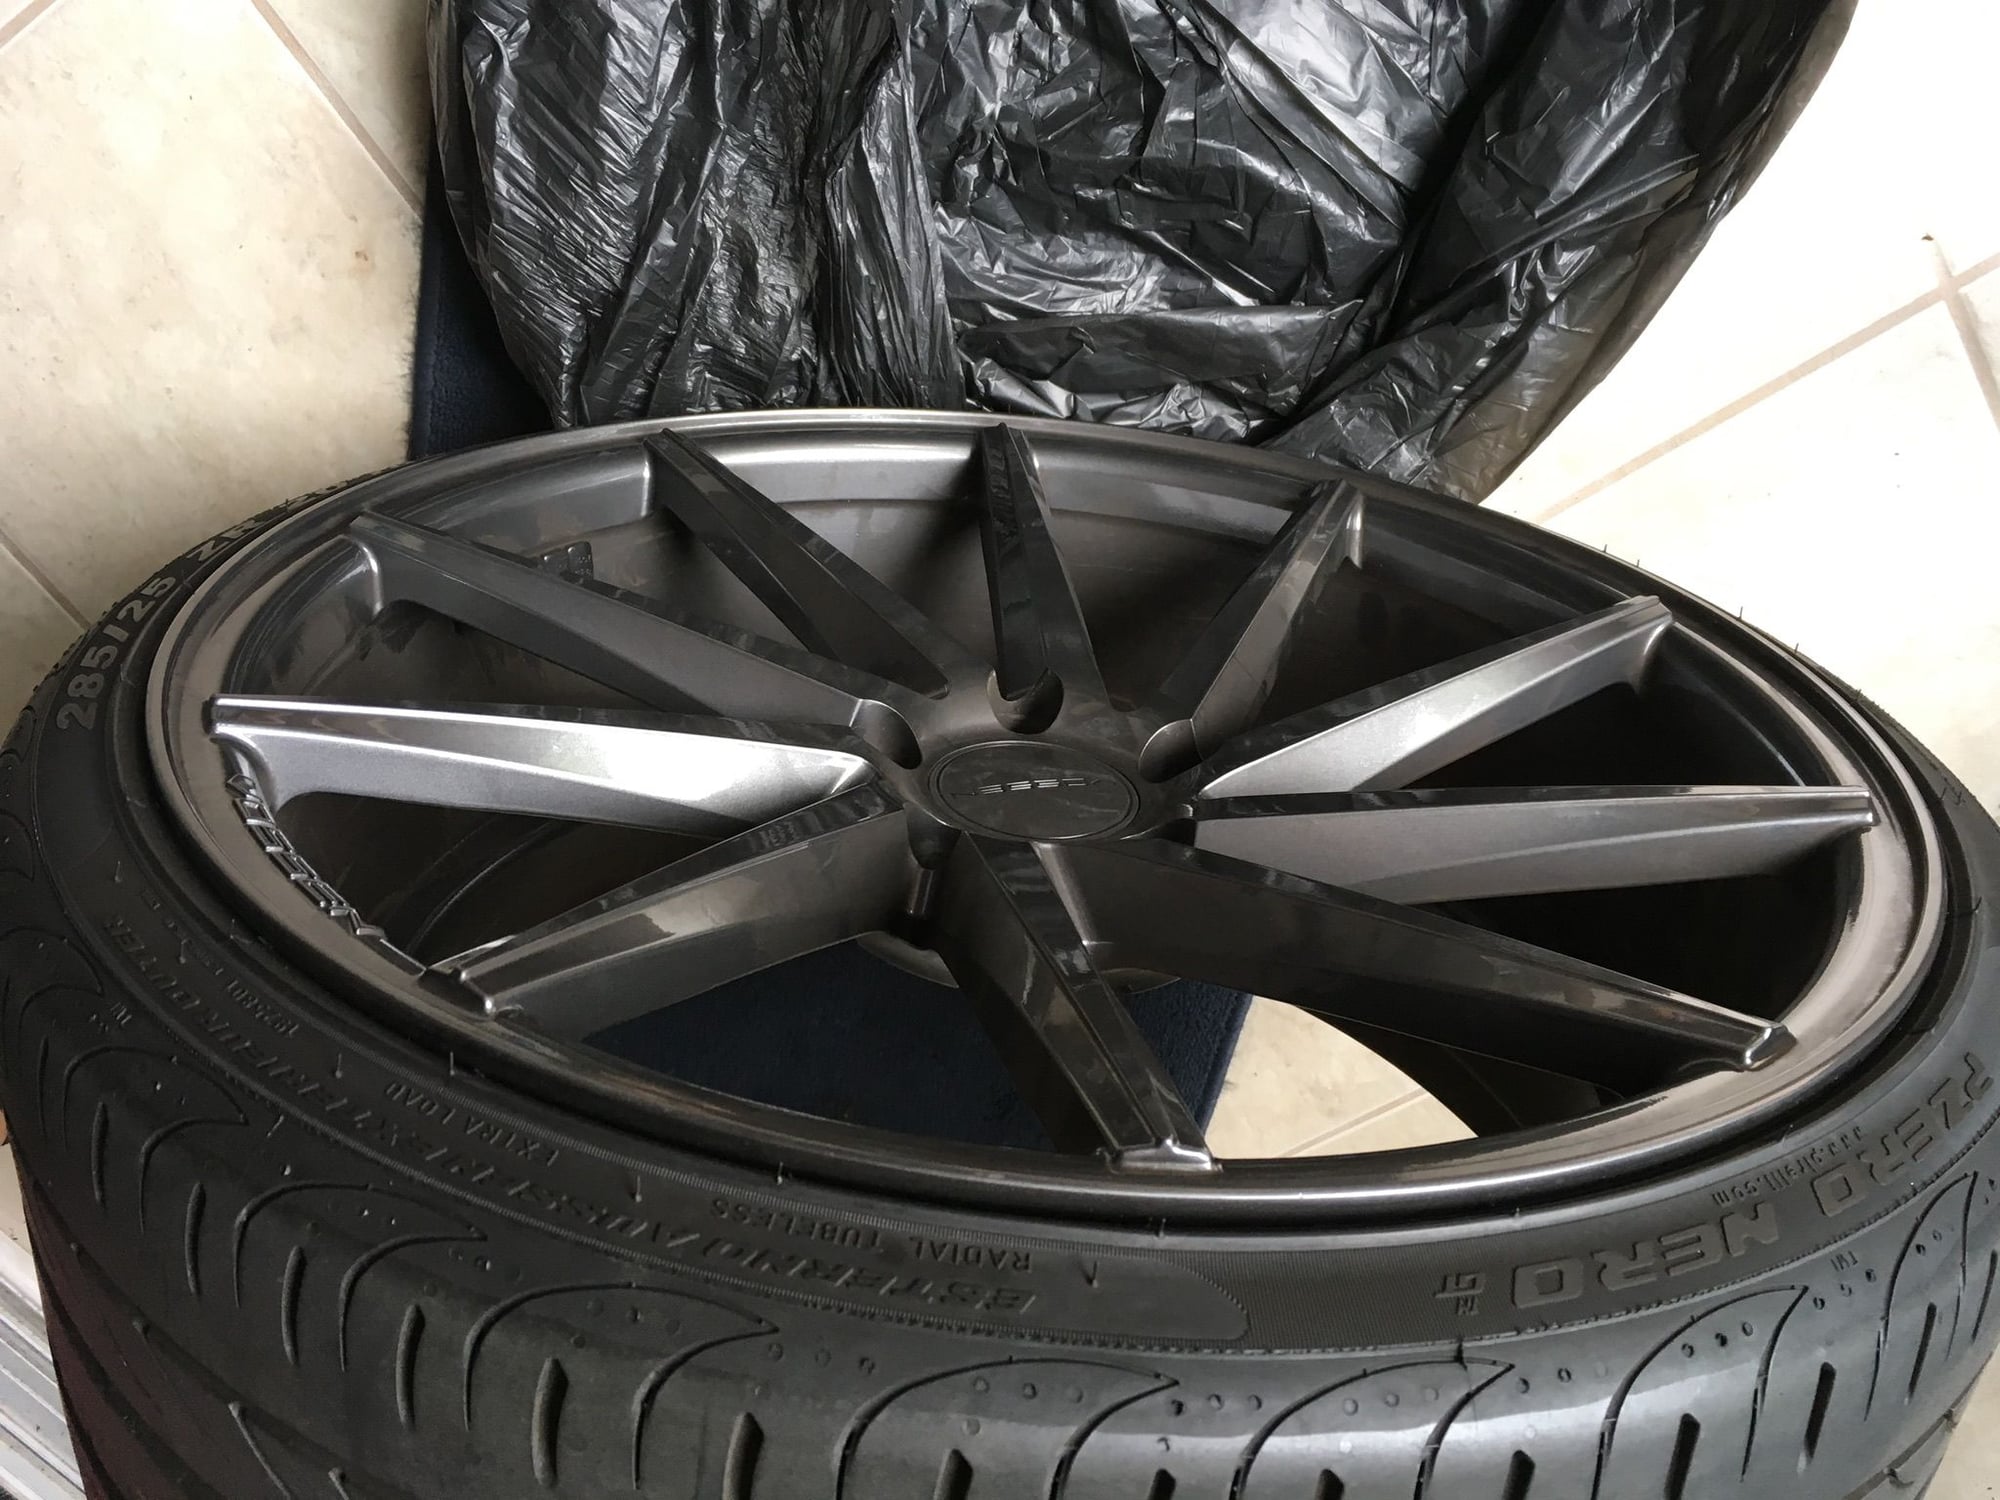 Wheels and Tires/Axles - Vossen 20 inch directional wheels - Used - Indianapols, IN 46228, United States